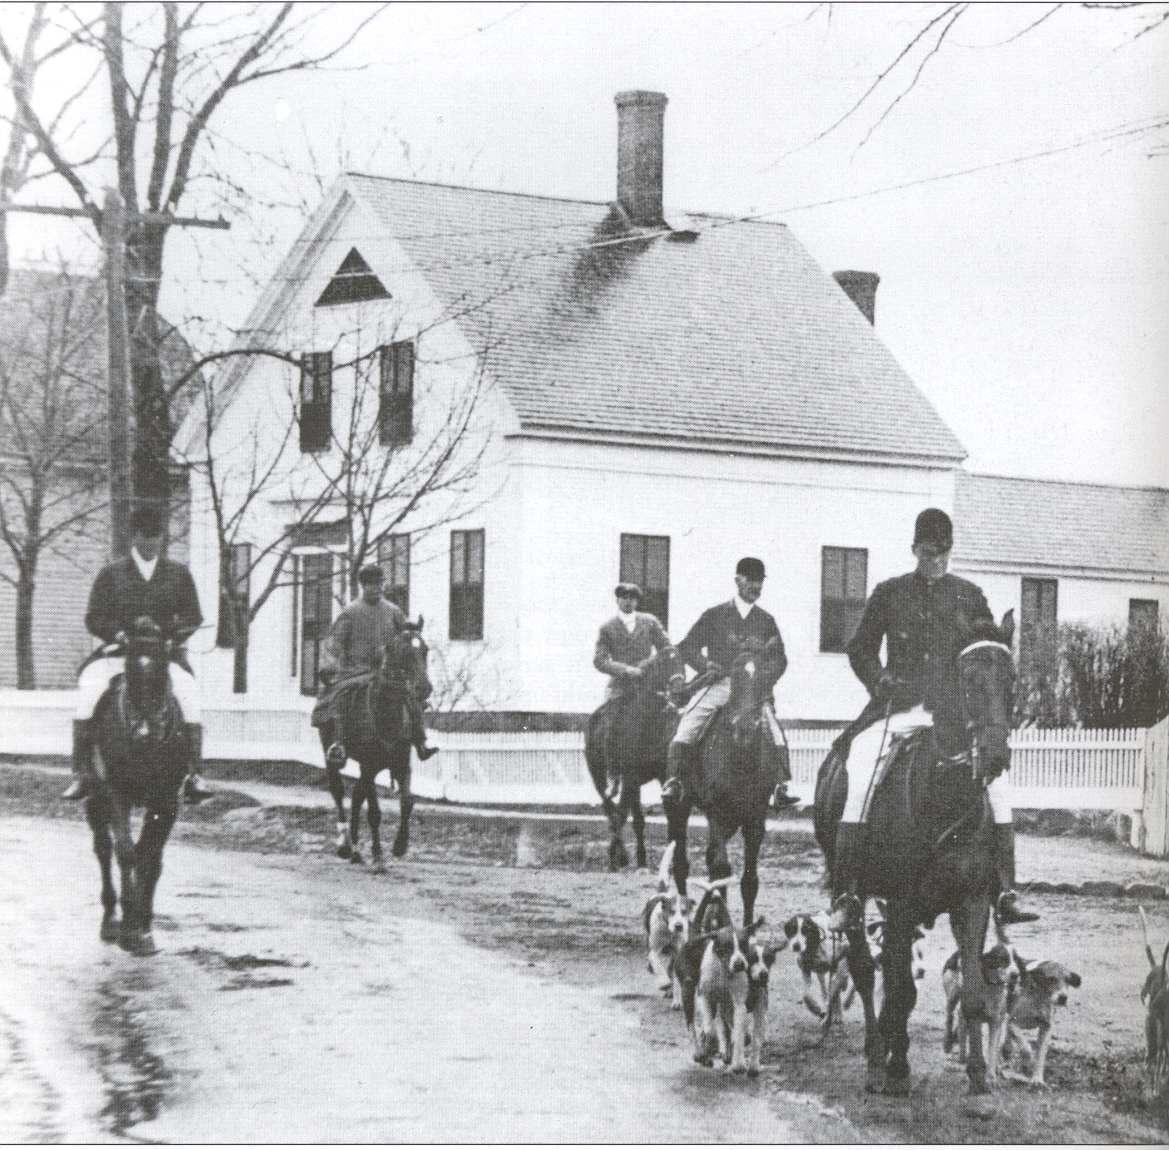 Image of a group of hunters riding on horseback in the 1930s at Cape Cod's most luxurious resort & spa